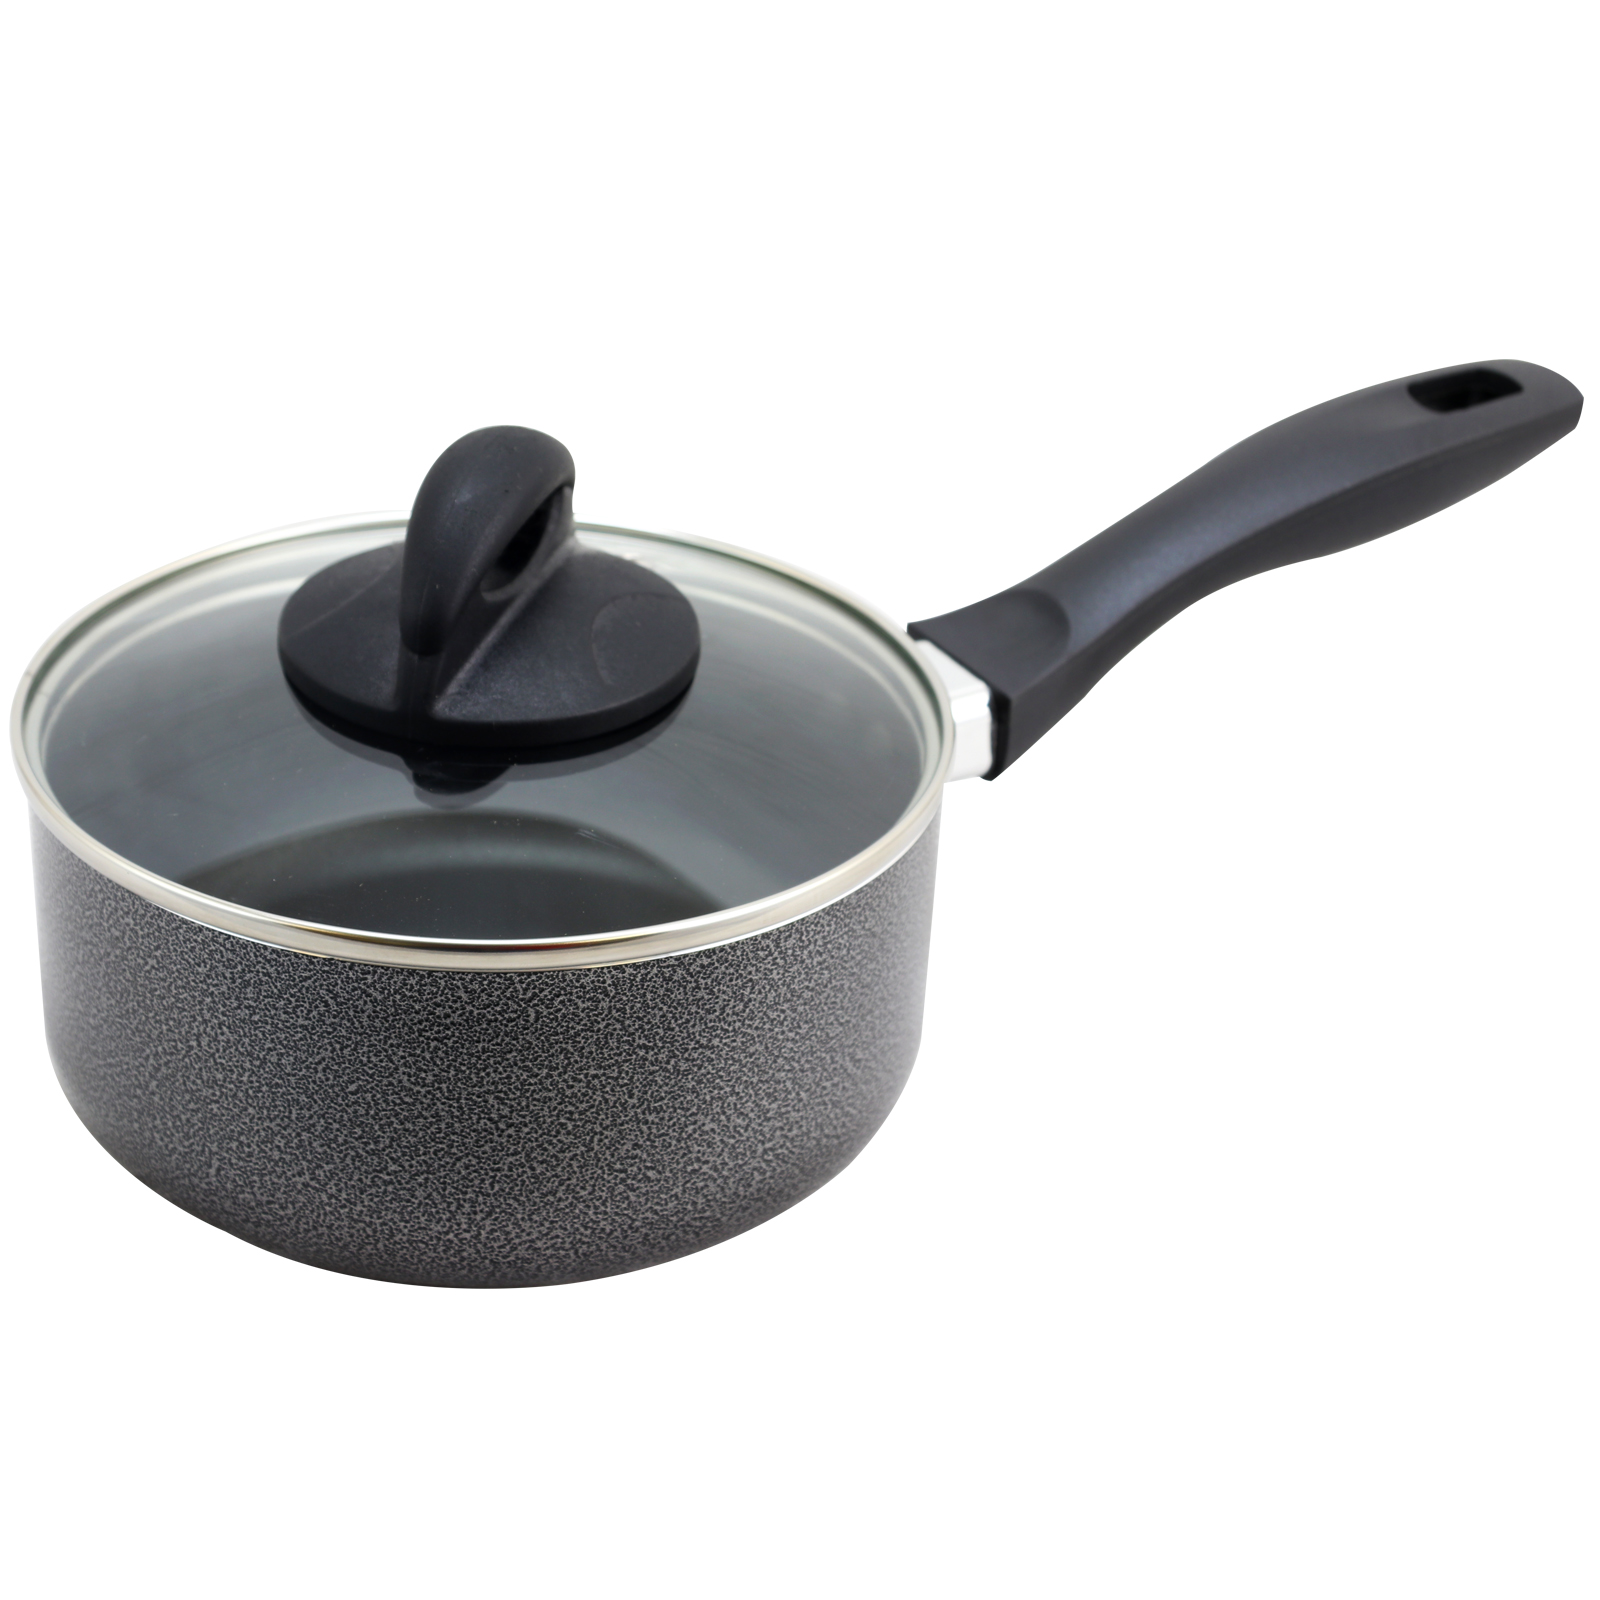 Oster Clairborne 1.5 Quart Sauce Pan with Lid in Charcoal Grey